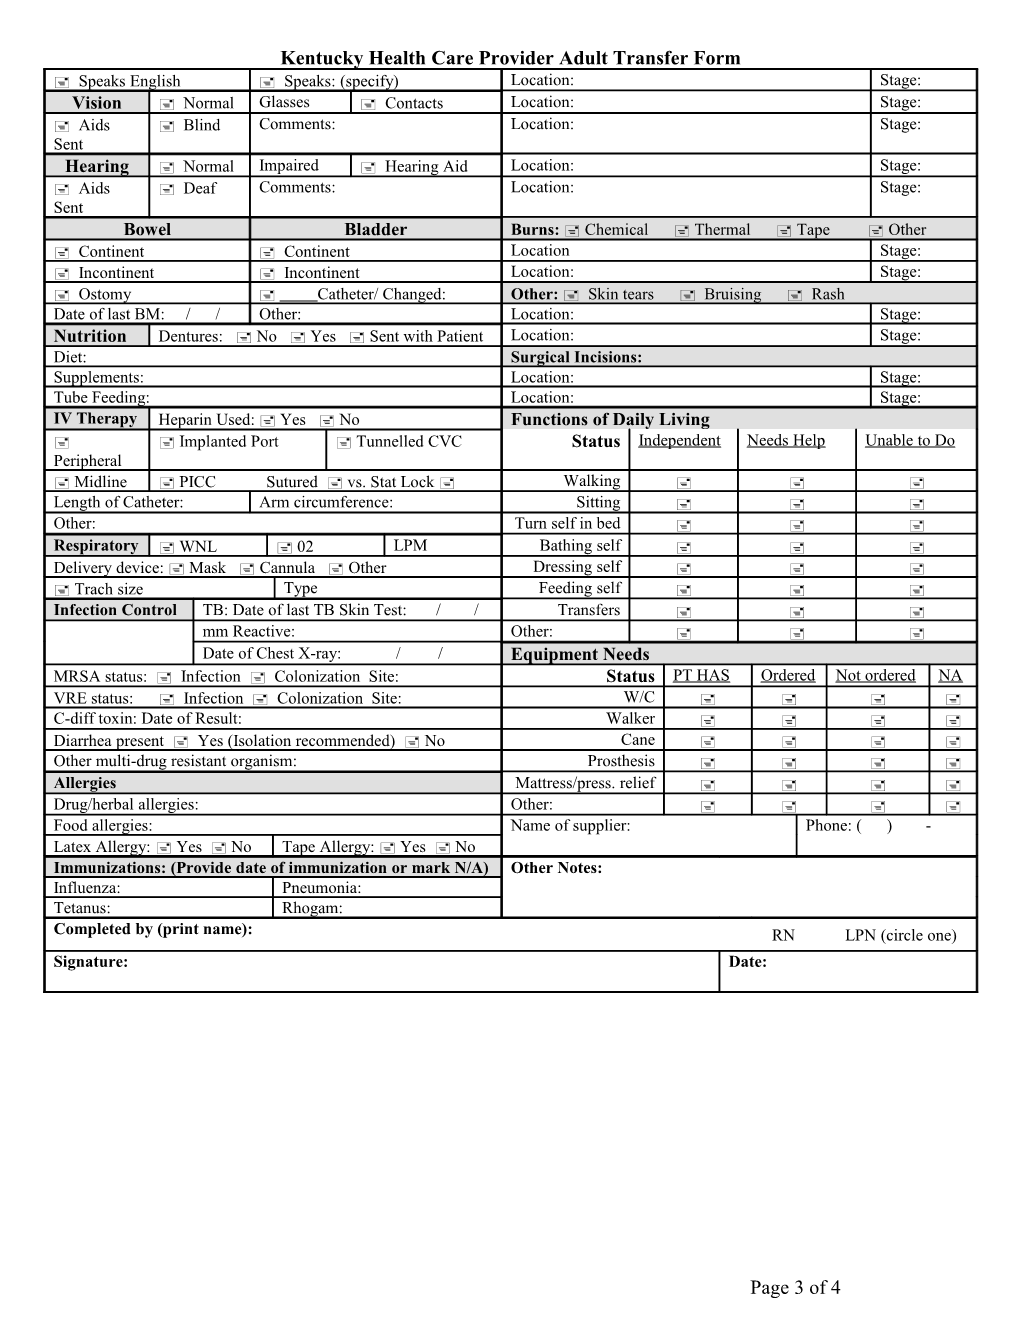 Kentucky Health Care Provider Adult Transfer Form